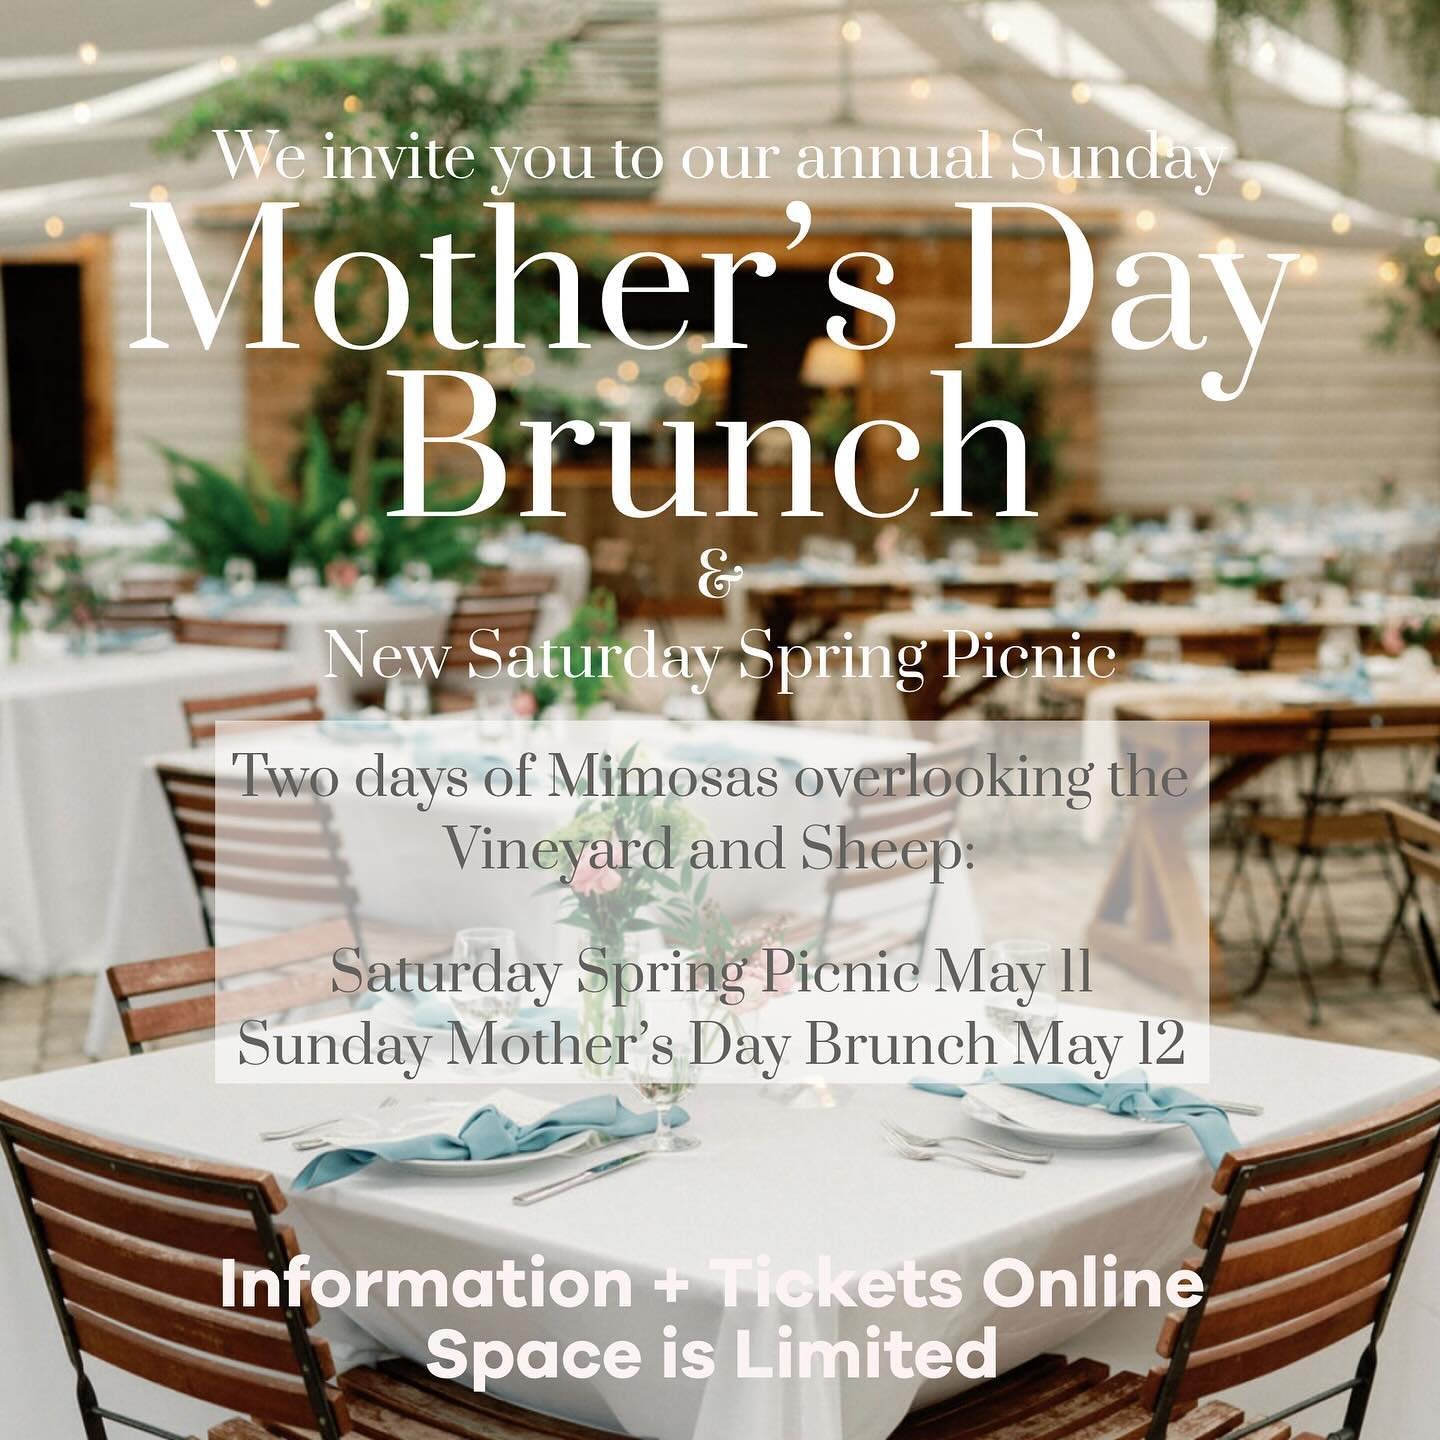 We are so excited to announce our third annual Sunday Mother&rsquo;s Day Brunch with our wonderful friend and neighbor @ksscatering AND adding a new Saturday Spring Picnic opportunity to better serve you! Join us each day for Wonderful Music + Lawn G